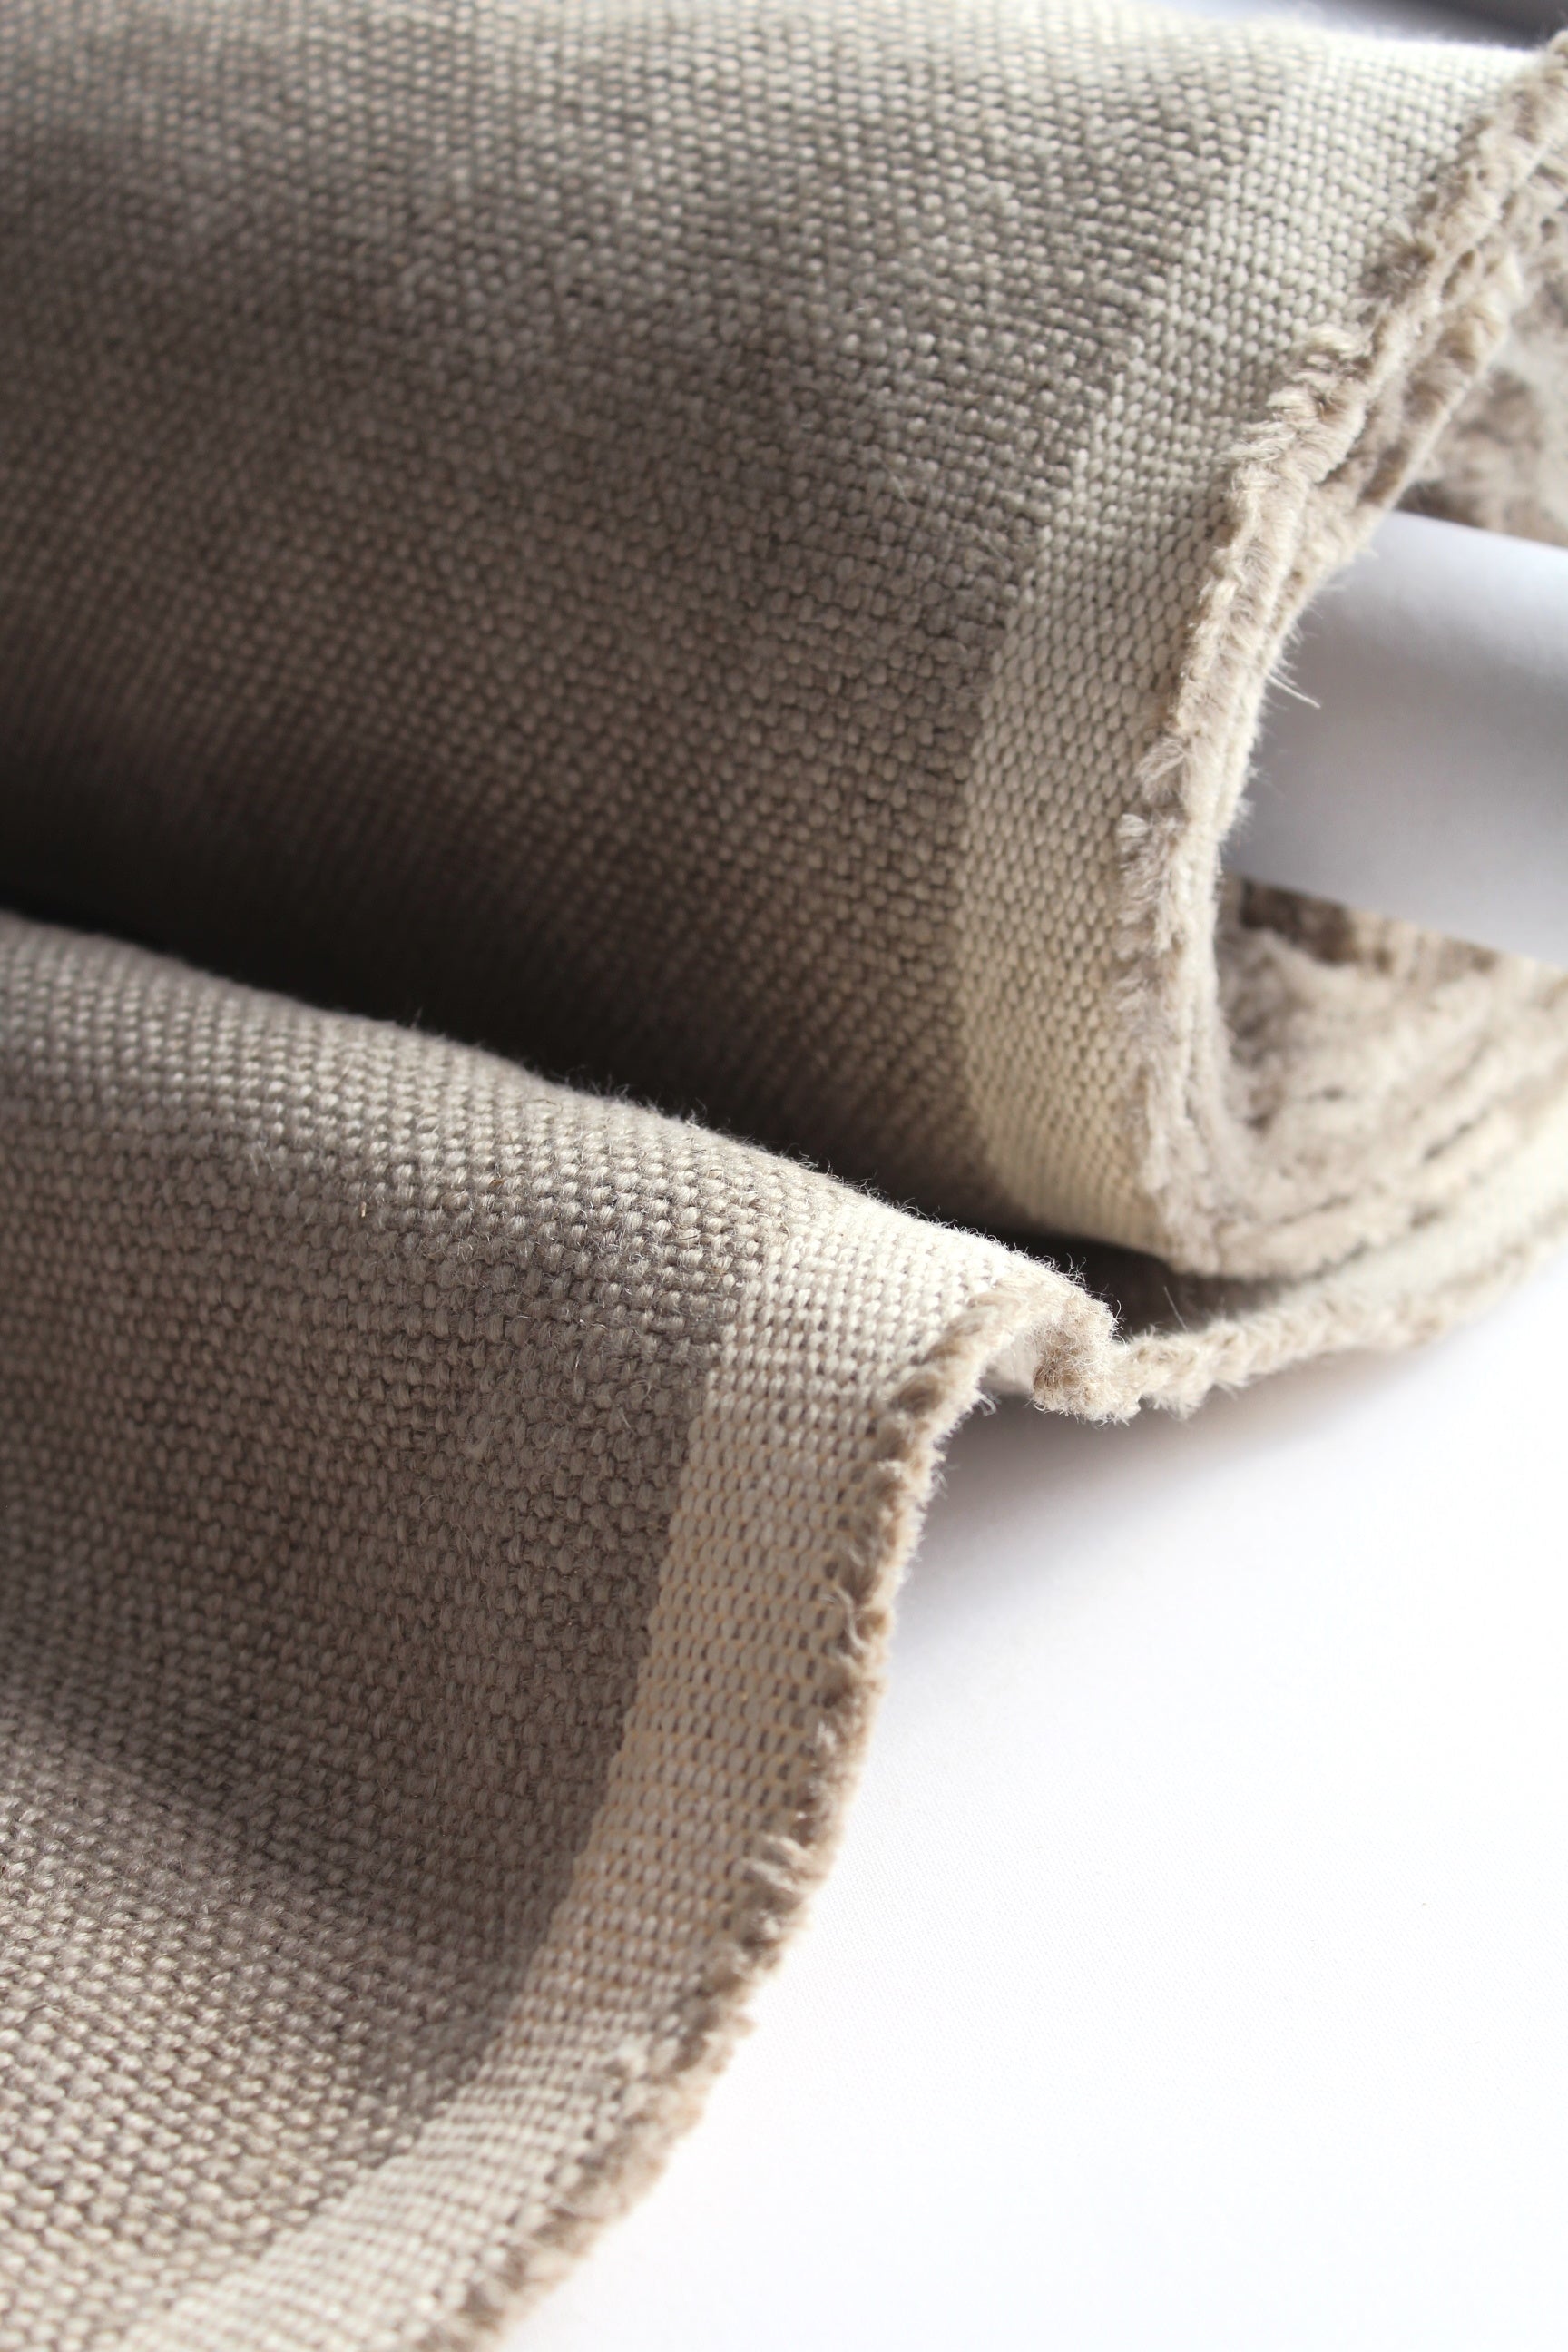 pure natural flax linen sand beige heavily woven texture heavy weight fabric